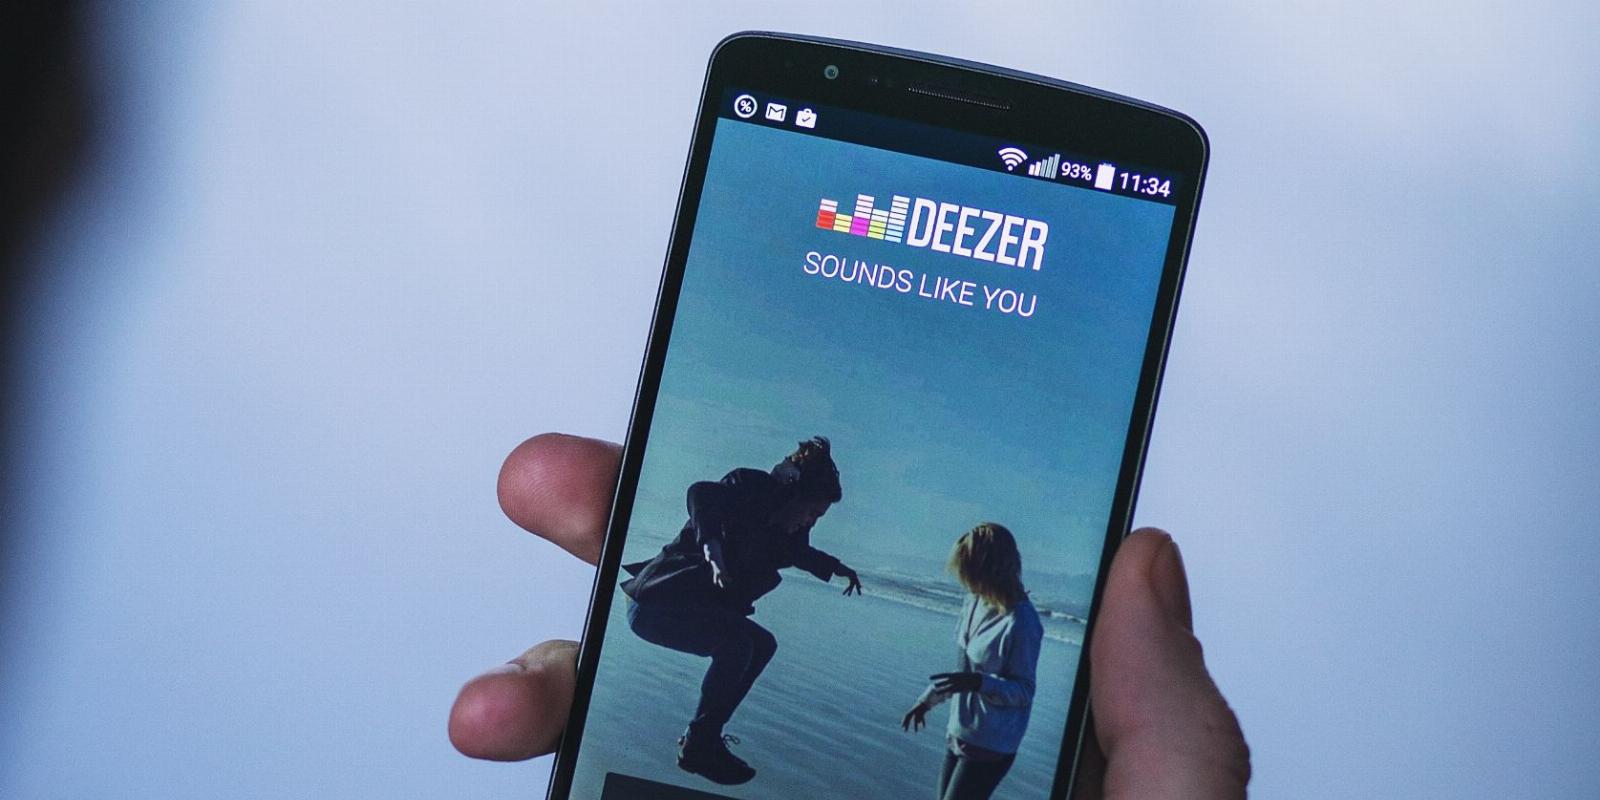 How to Protect Yourself After Deezer Data Breach